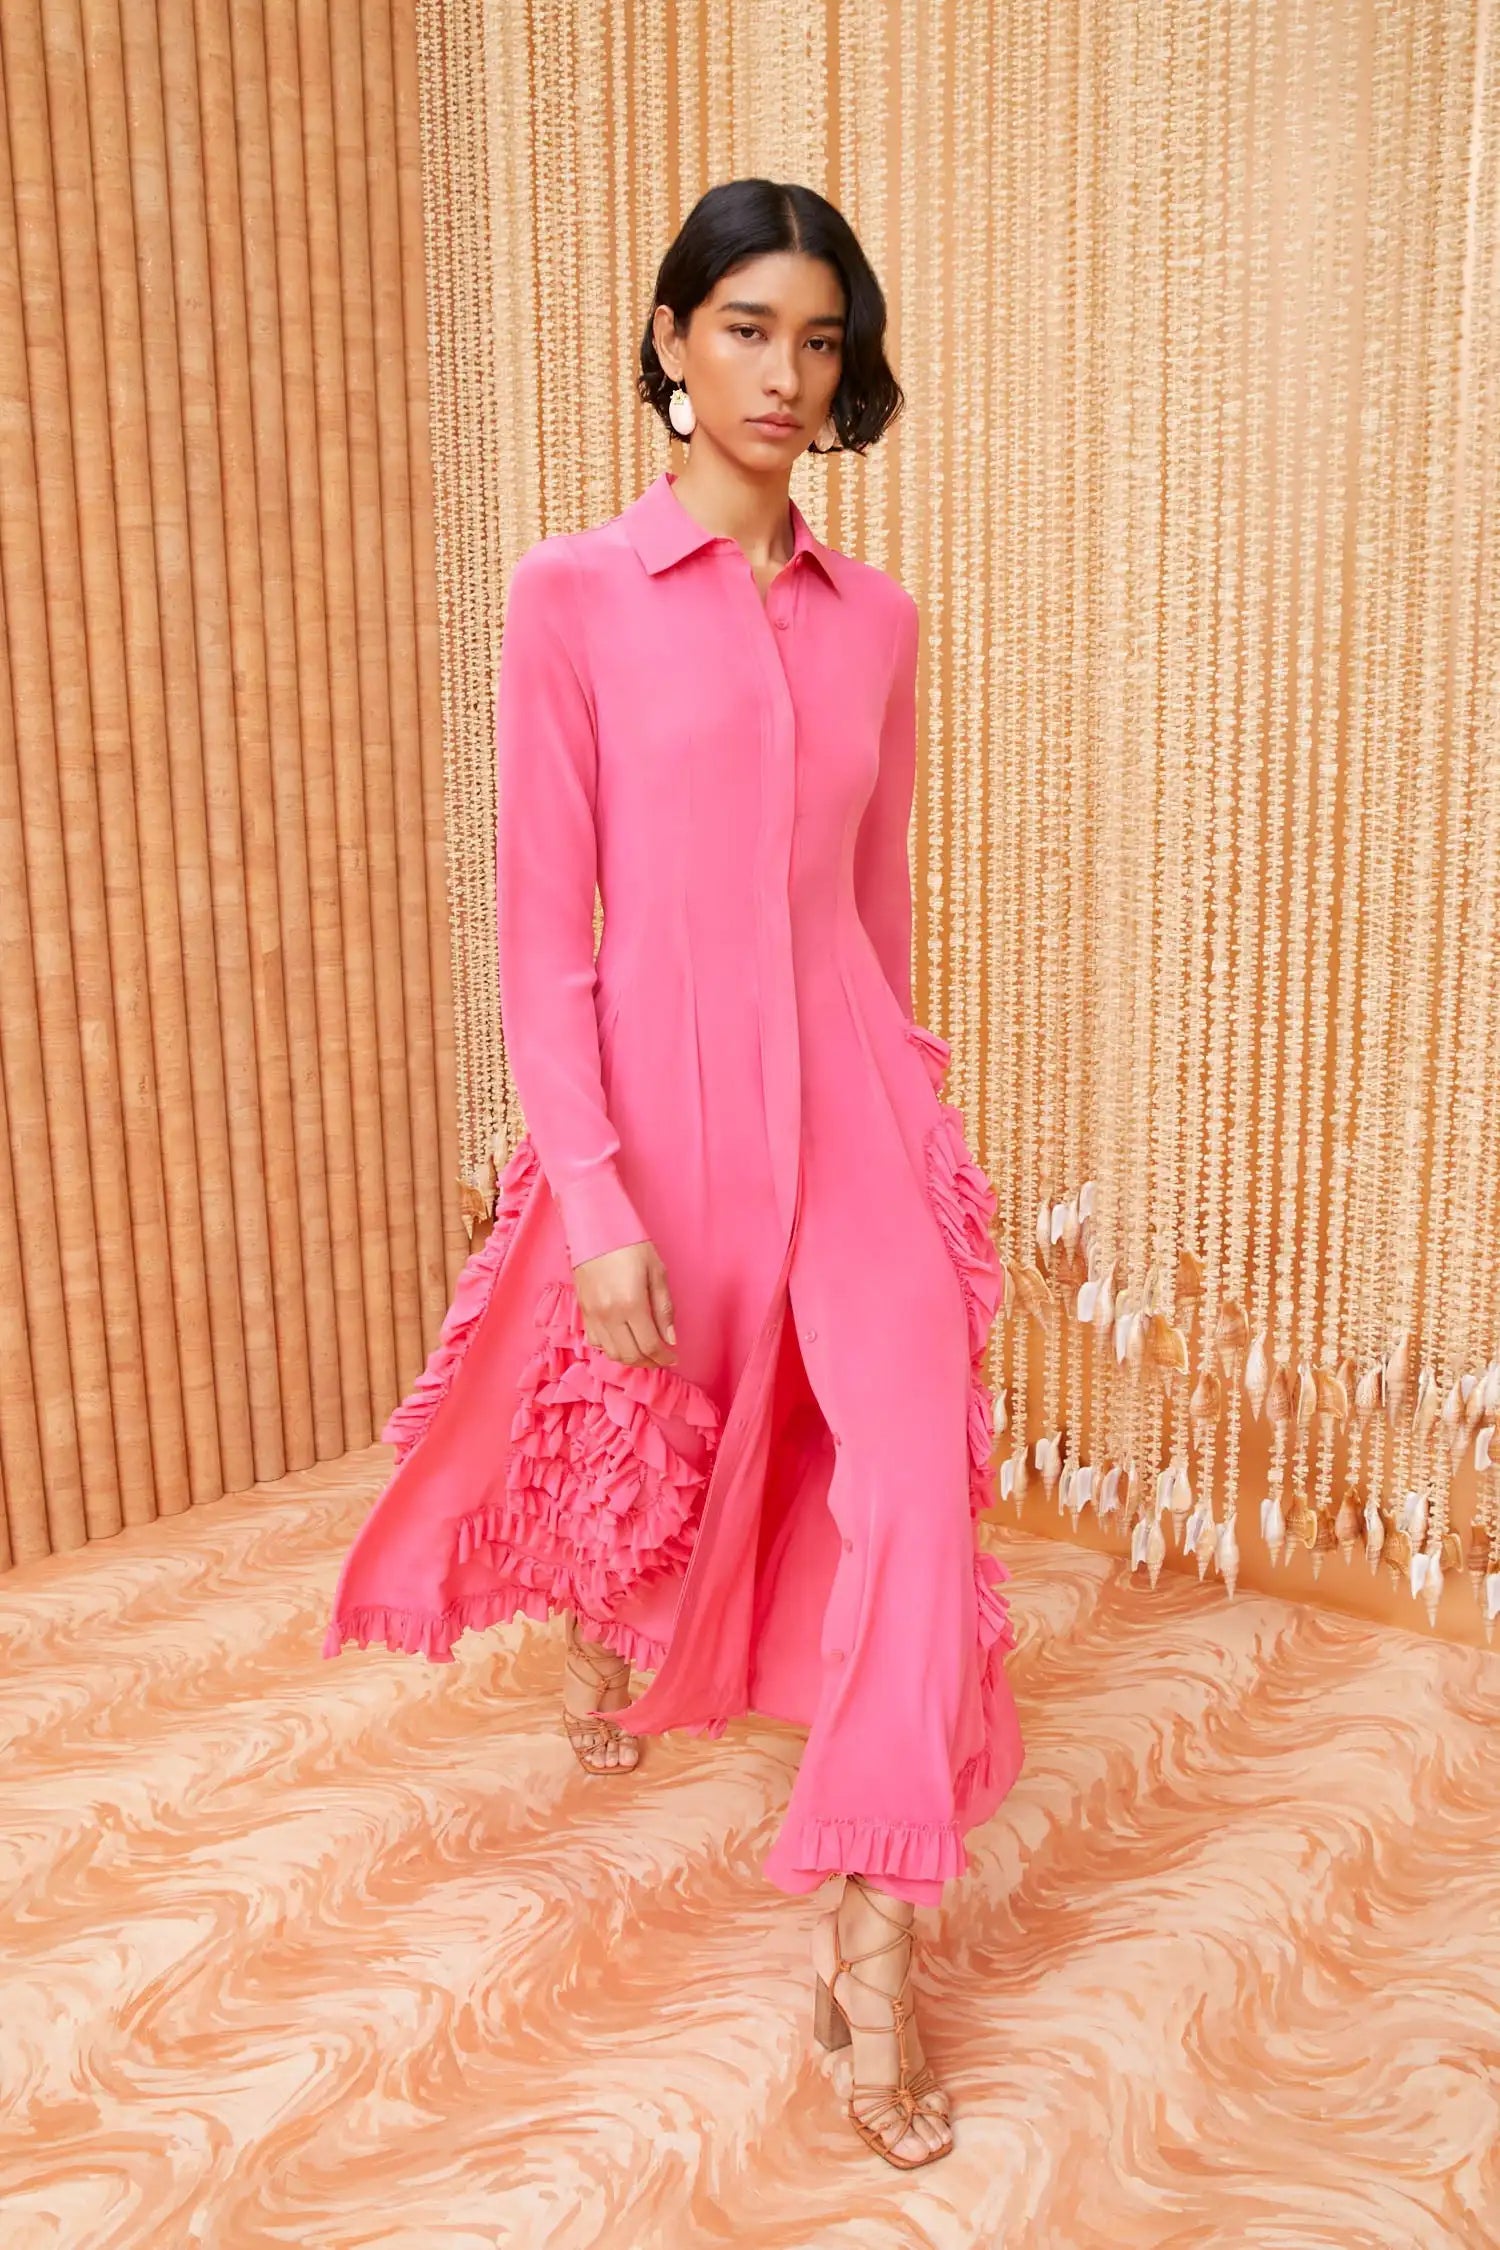 Introducing Dress Eileen, the must-have fashion staple from Ulla Johnson. Crafted with high-quality materials and handcrafted by expert designers, this pink long shirt dress is perfect for any occasion, from banquets to everyday wear. Elevate your wardrobe with this timeless and luxurious piece.